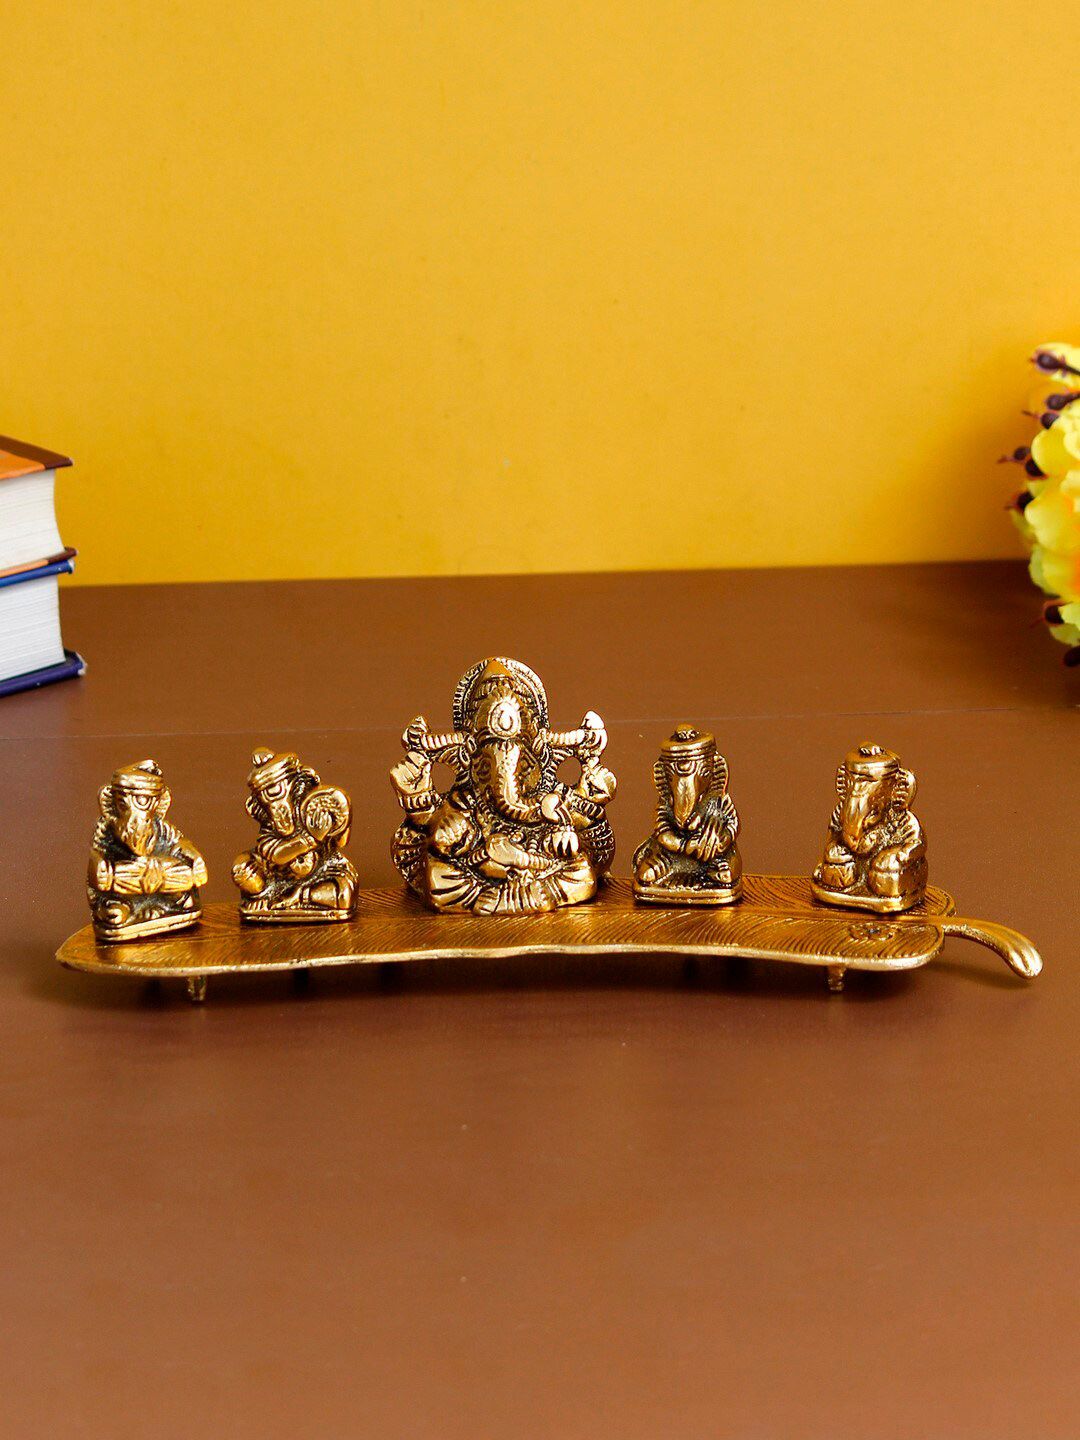 eCraftIndia Unisex Set of 5 Musical Ganesha Handcrafted Showpiece with Incense Holder Price in India